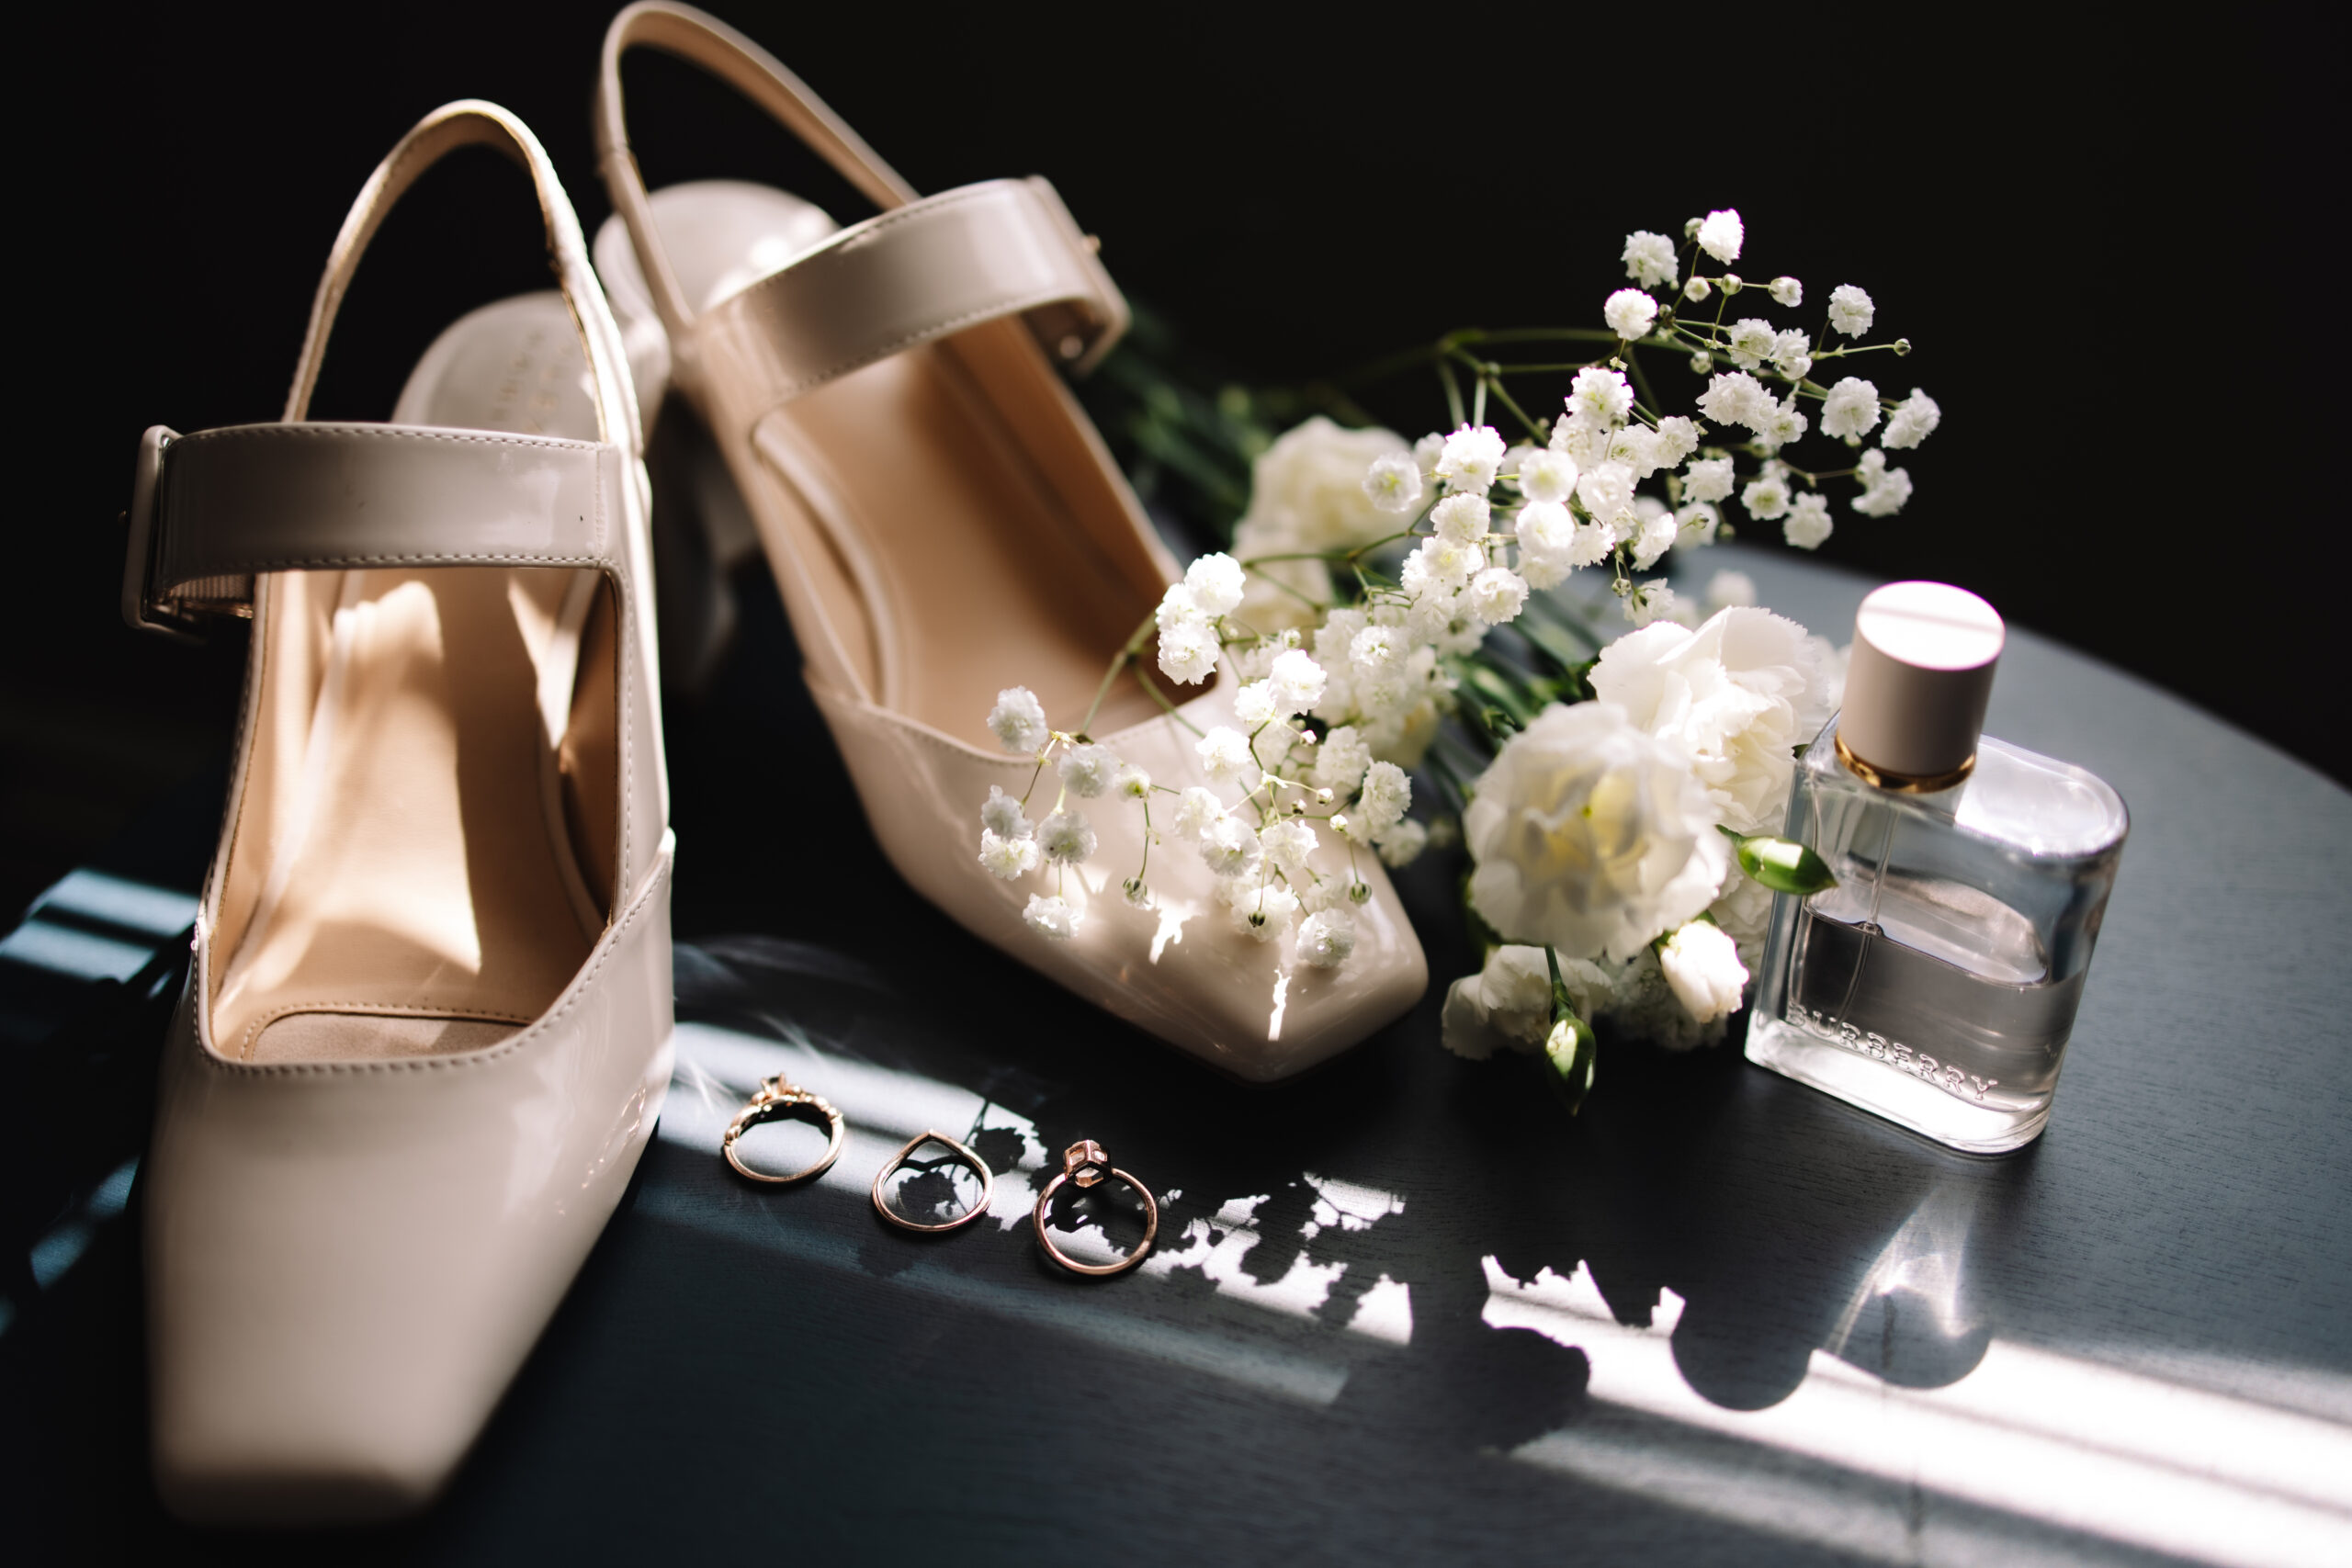 Elegant, simple wedding flat lay detail shot including shoes, white flowers, perfume and rings